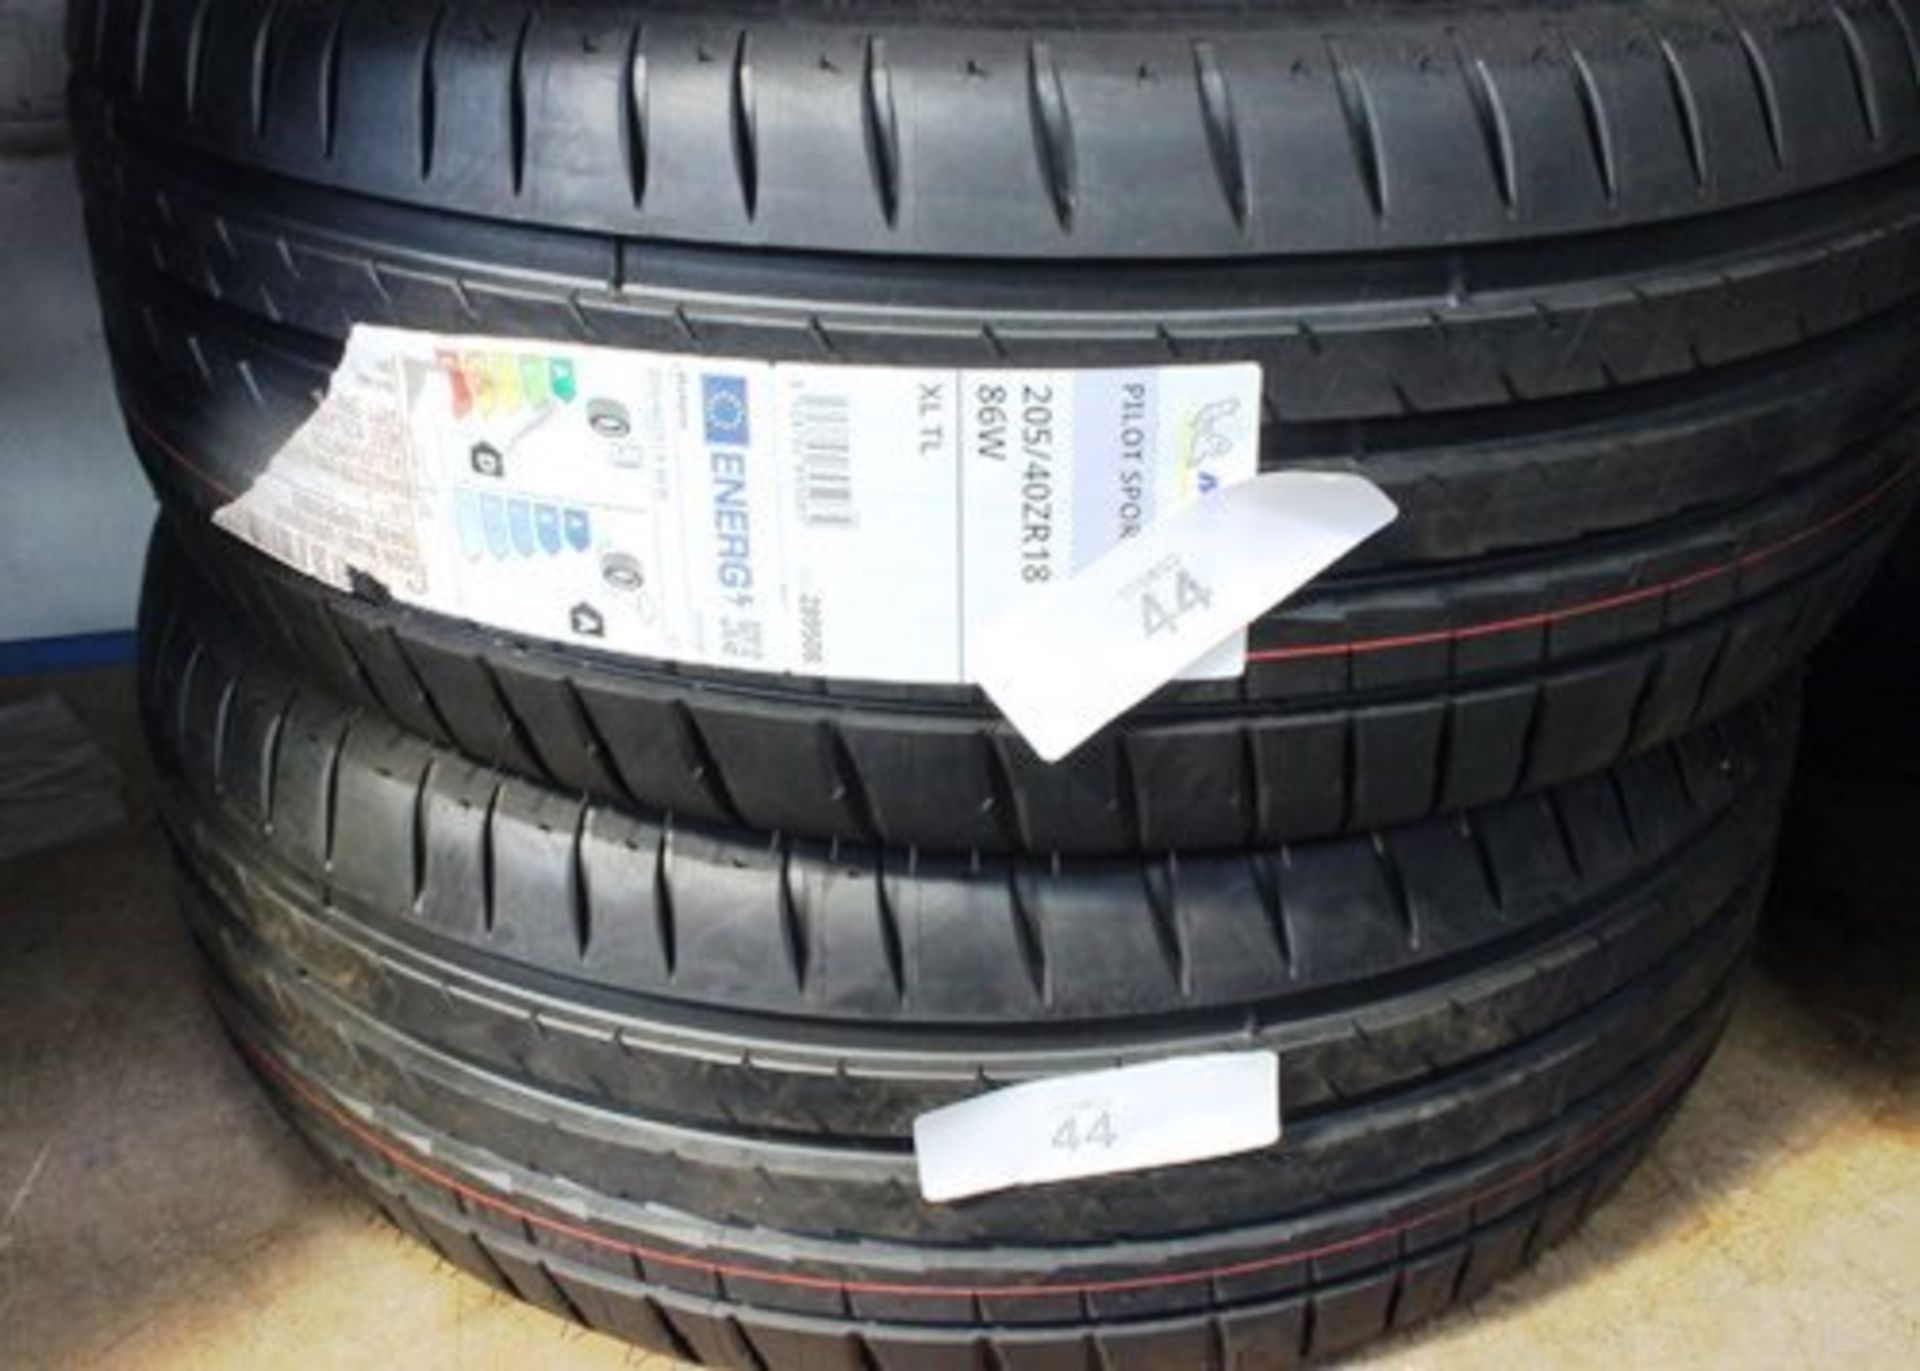 2 x Michelin Pilot Sport 4 tyres, size 205/40ZR18 86W XL TL - New with labels (GS4)